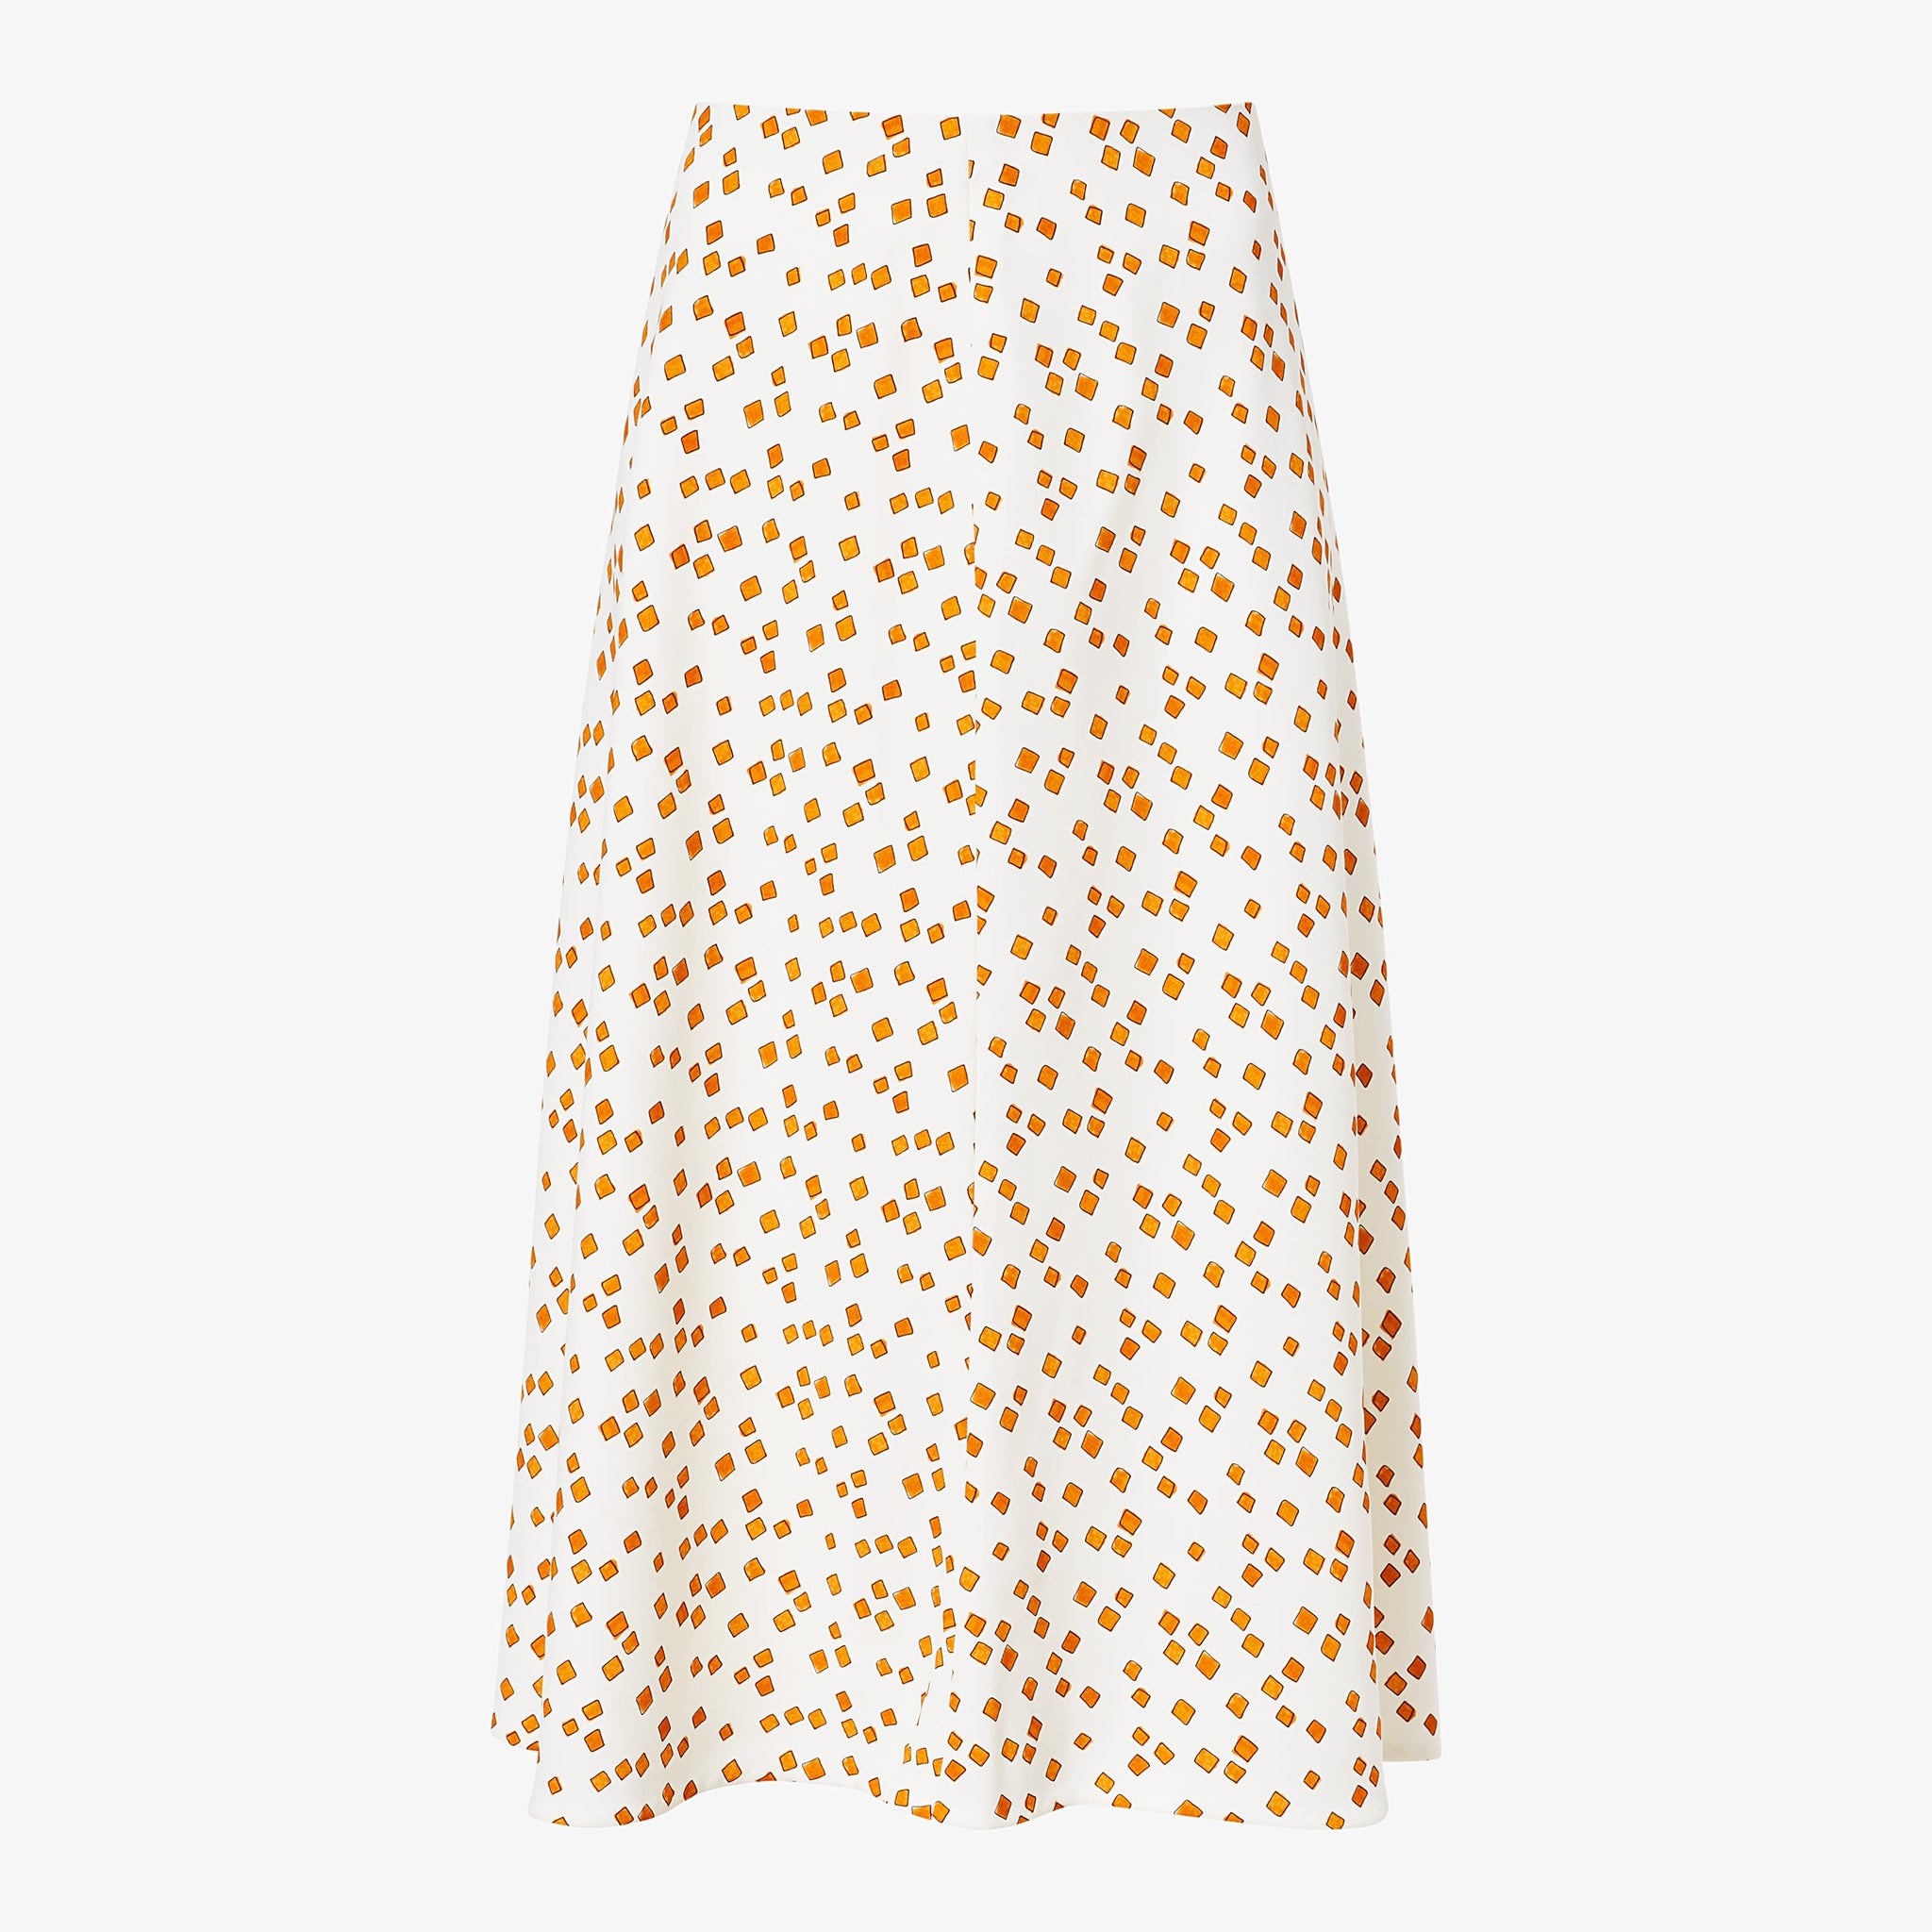 Packshot image of the orchard skirt in mosaic print in goldenrod and ivory